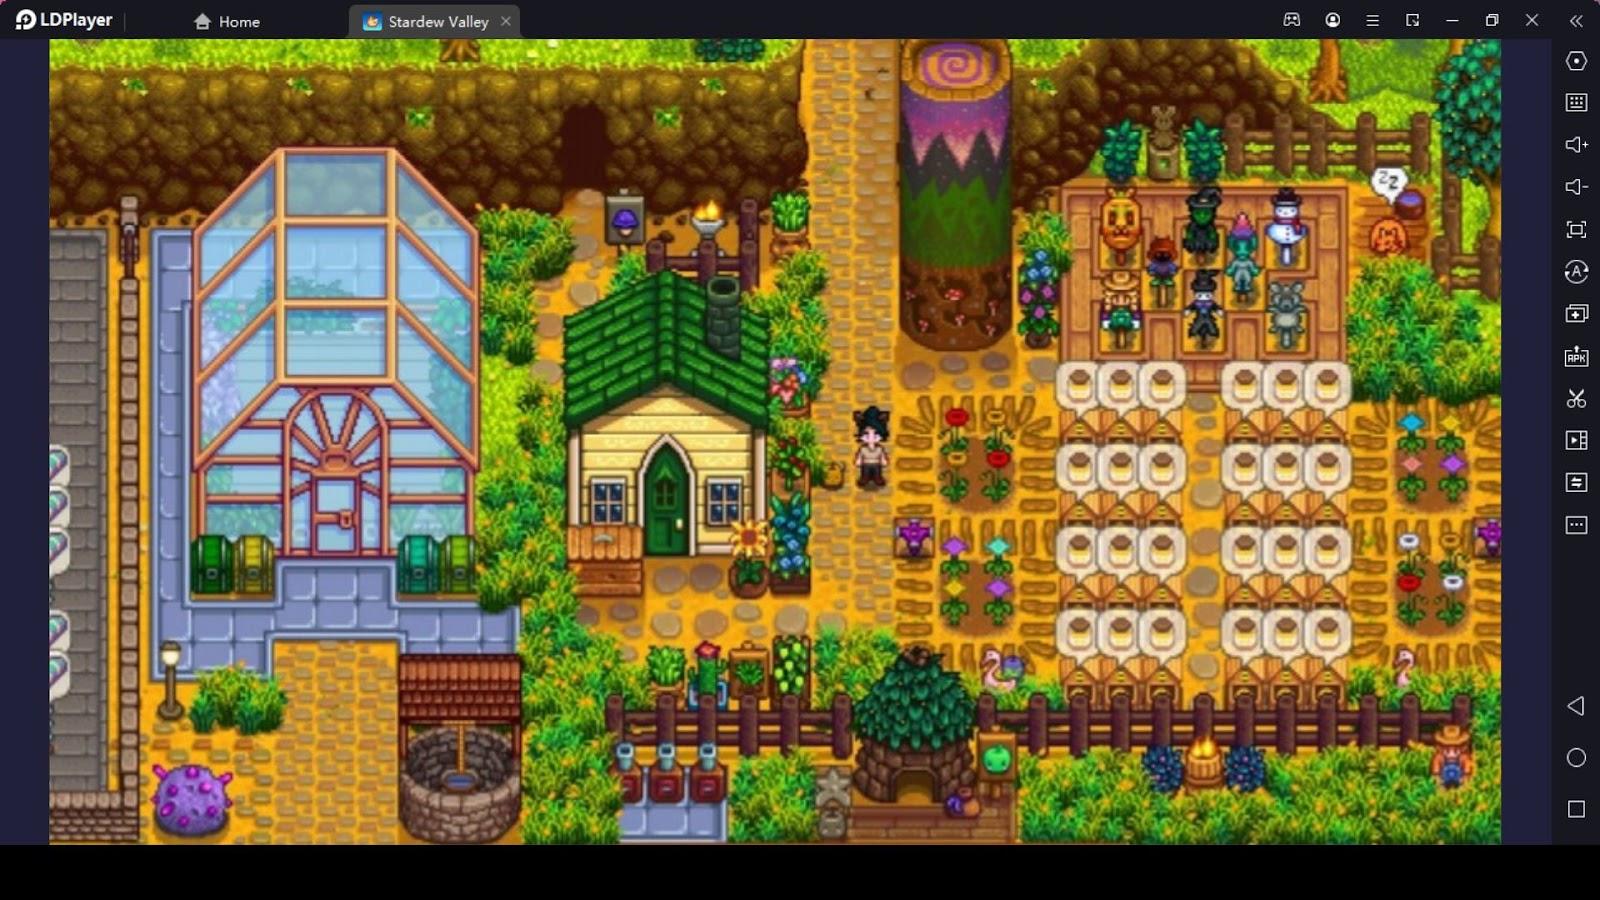 Bee Lovers’ Layout